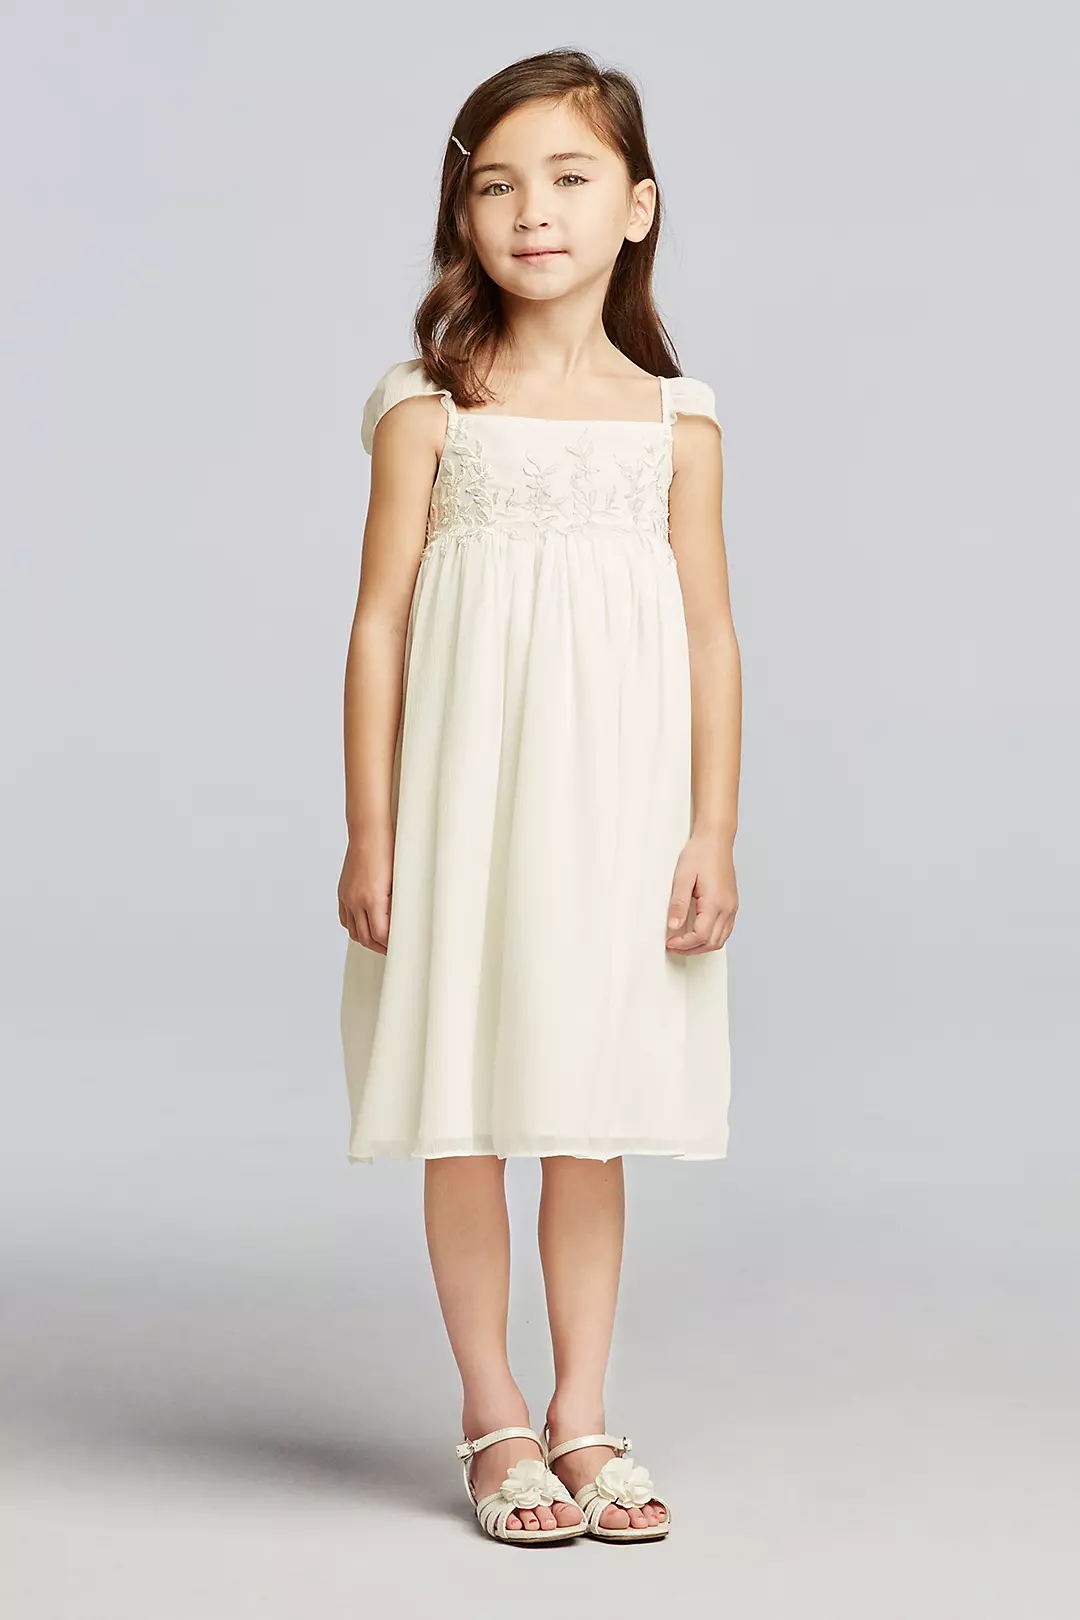 As-Is Chiffon Flower Girl Dress with Cap Sleeves Image